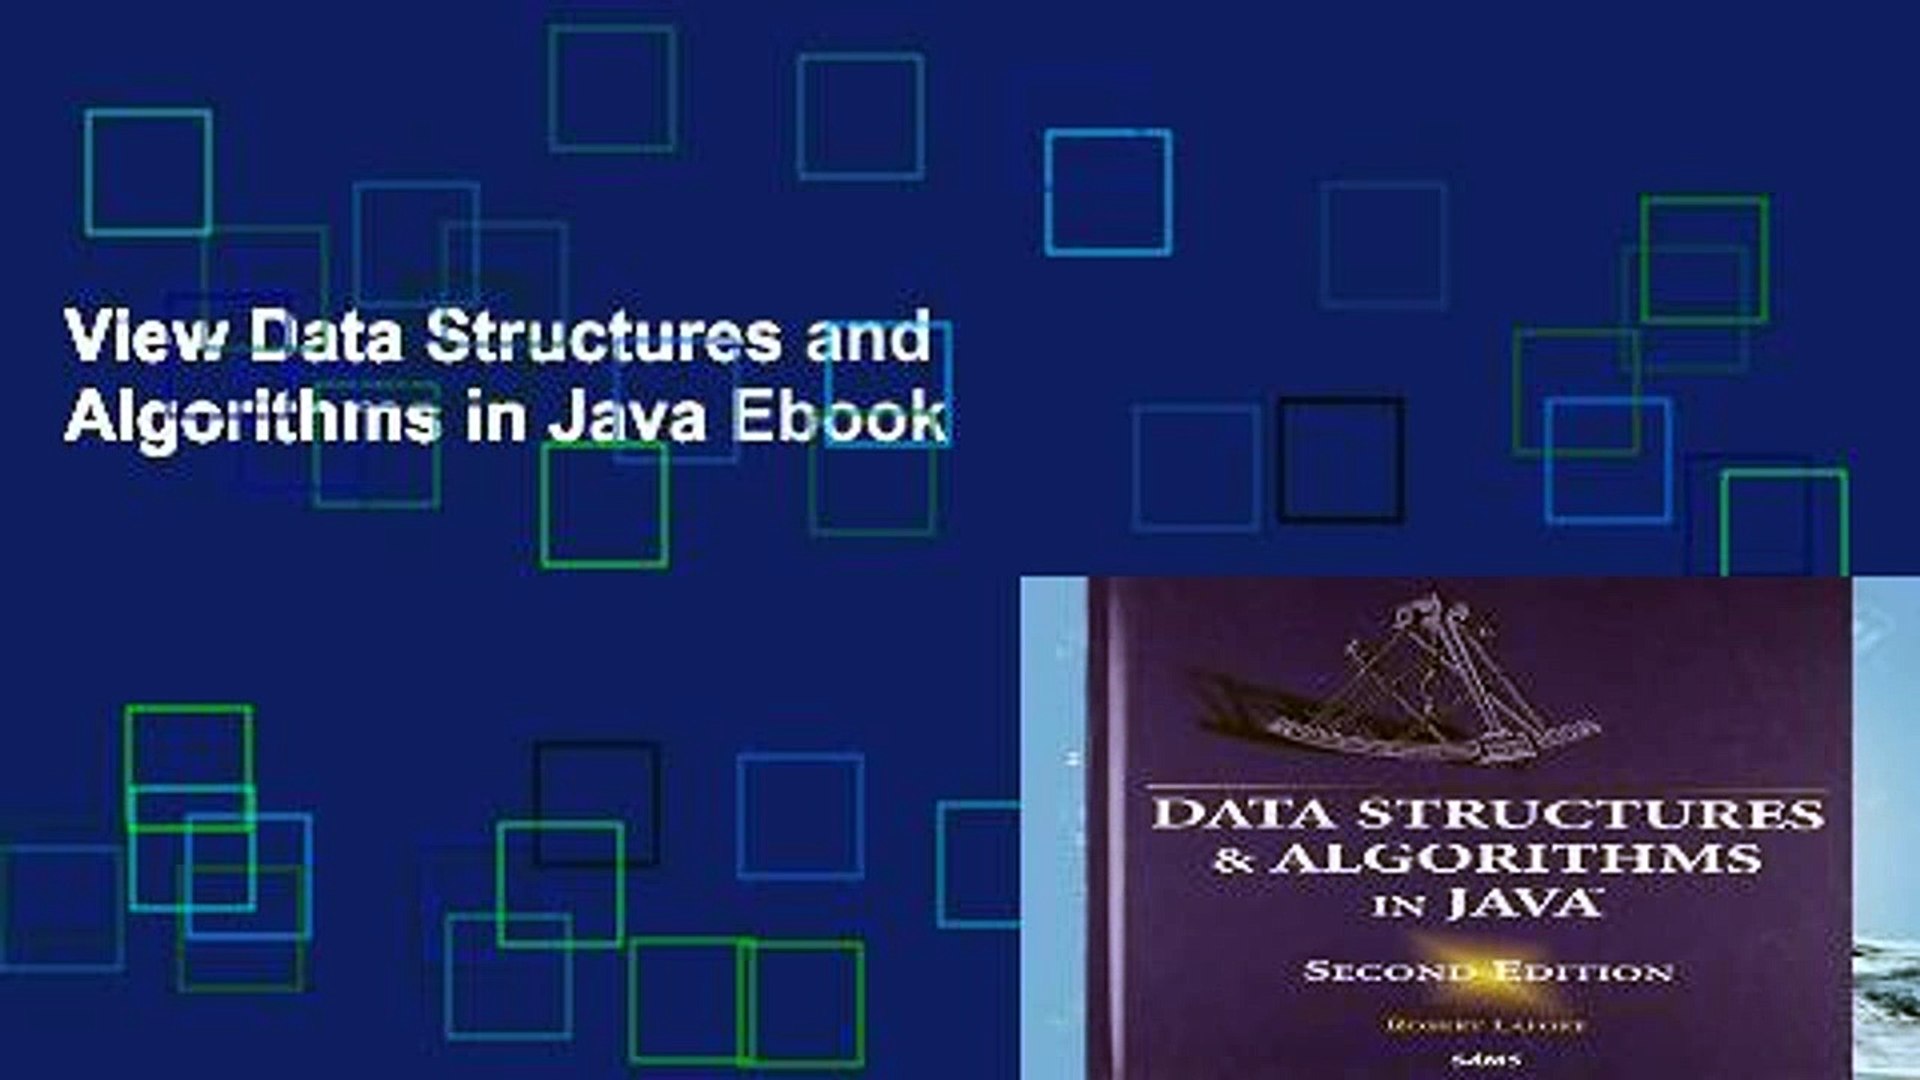 View Data Structures and Algorithms in Java Ebook